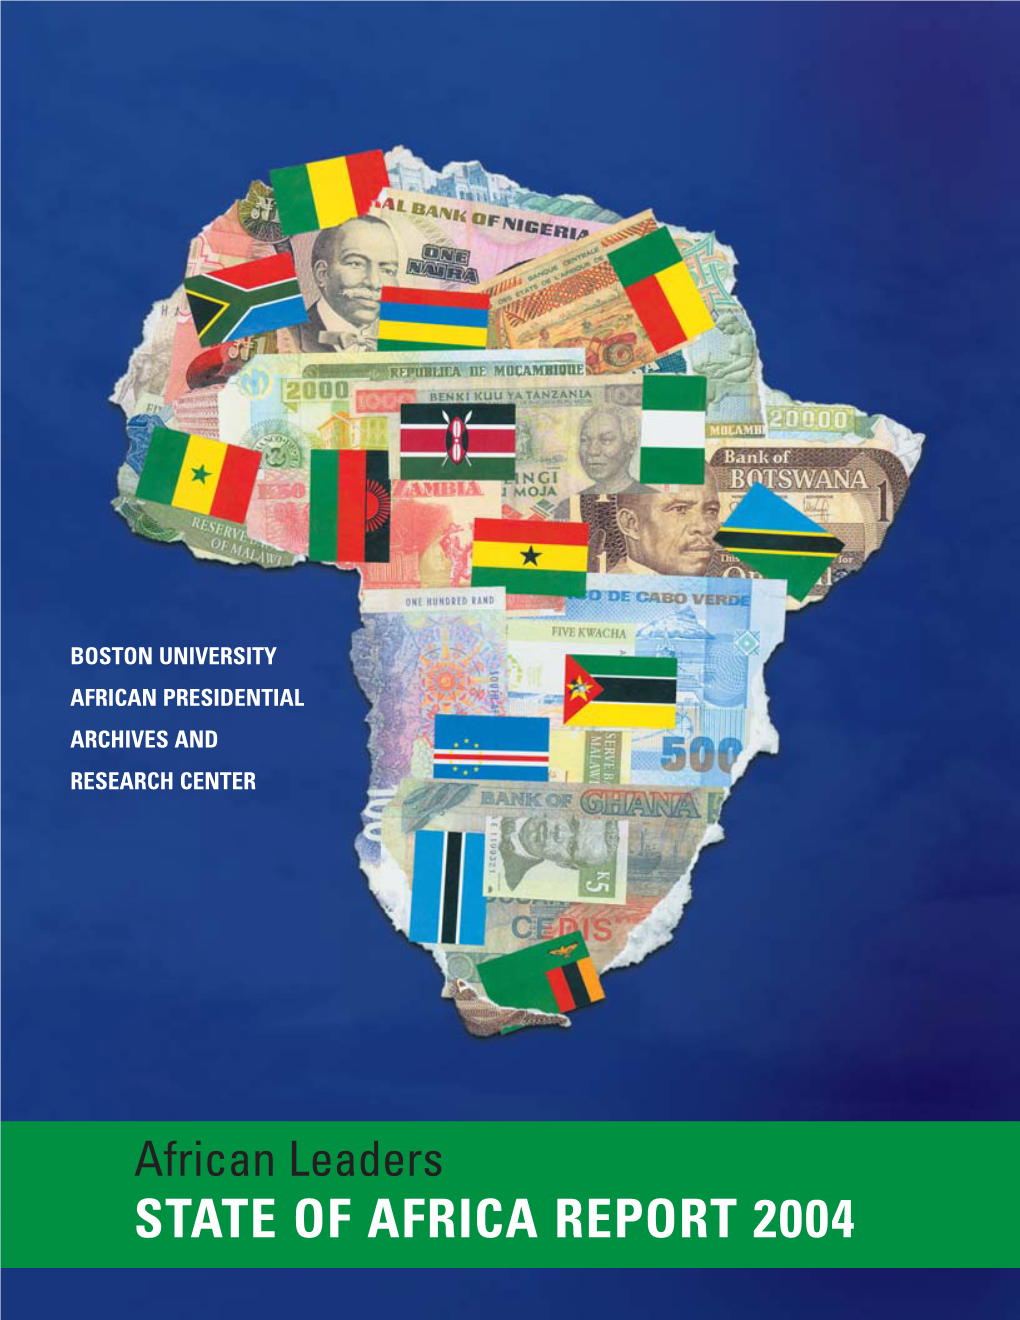 State of Africa Report 2004 Contents